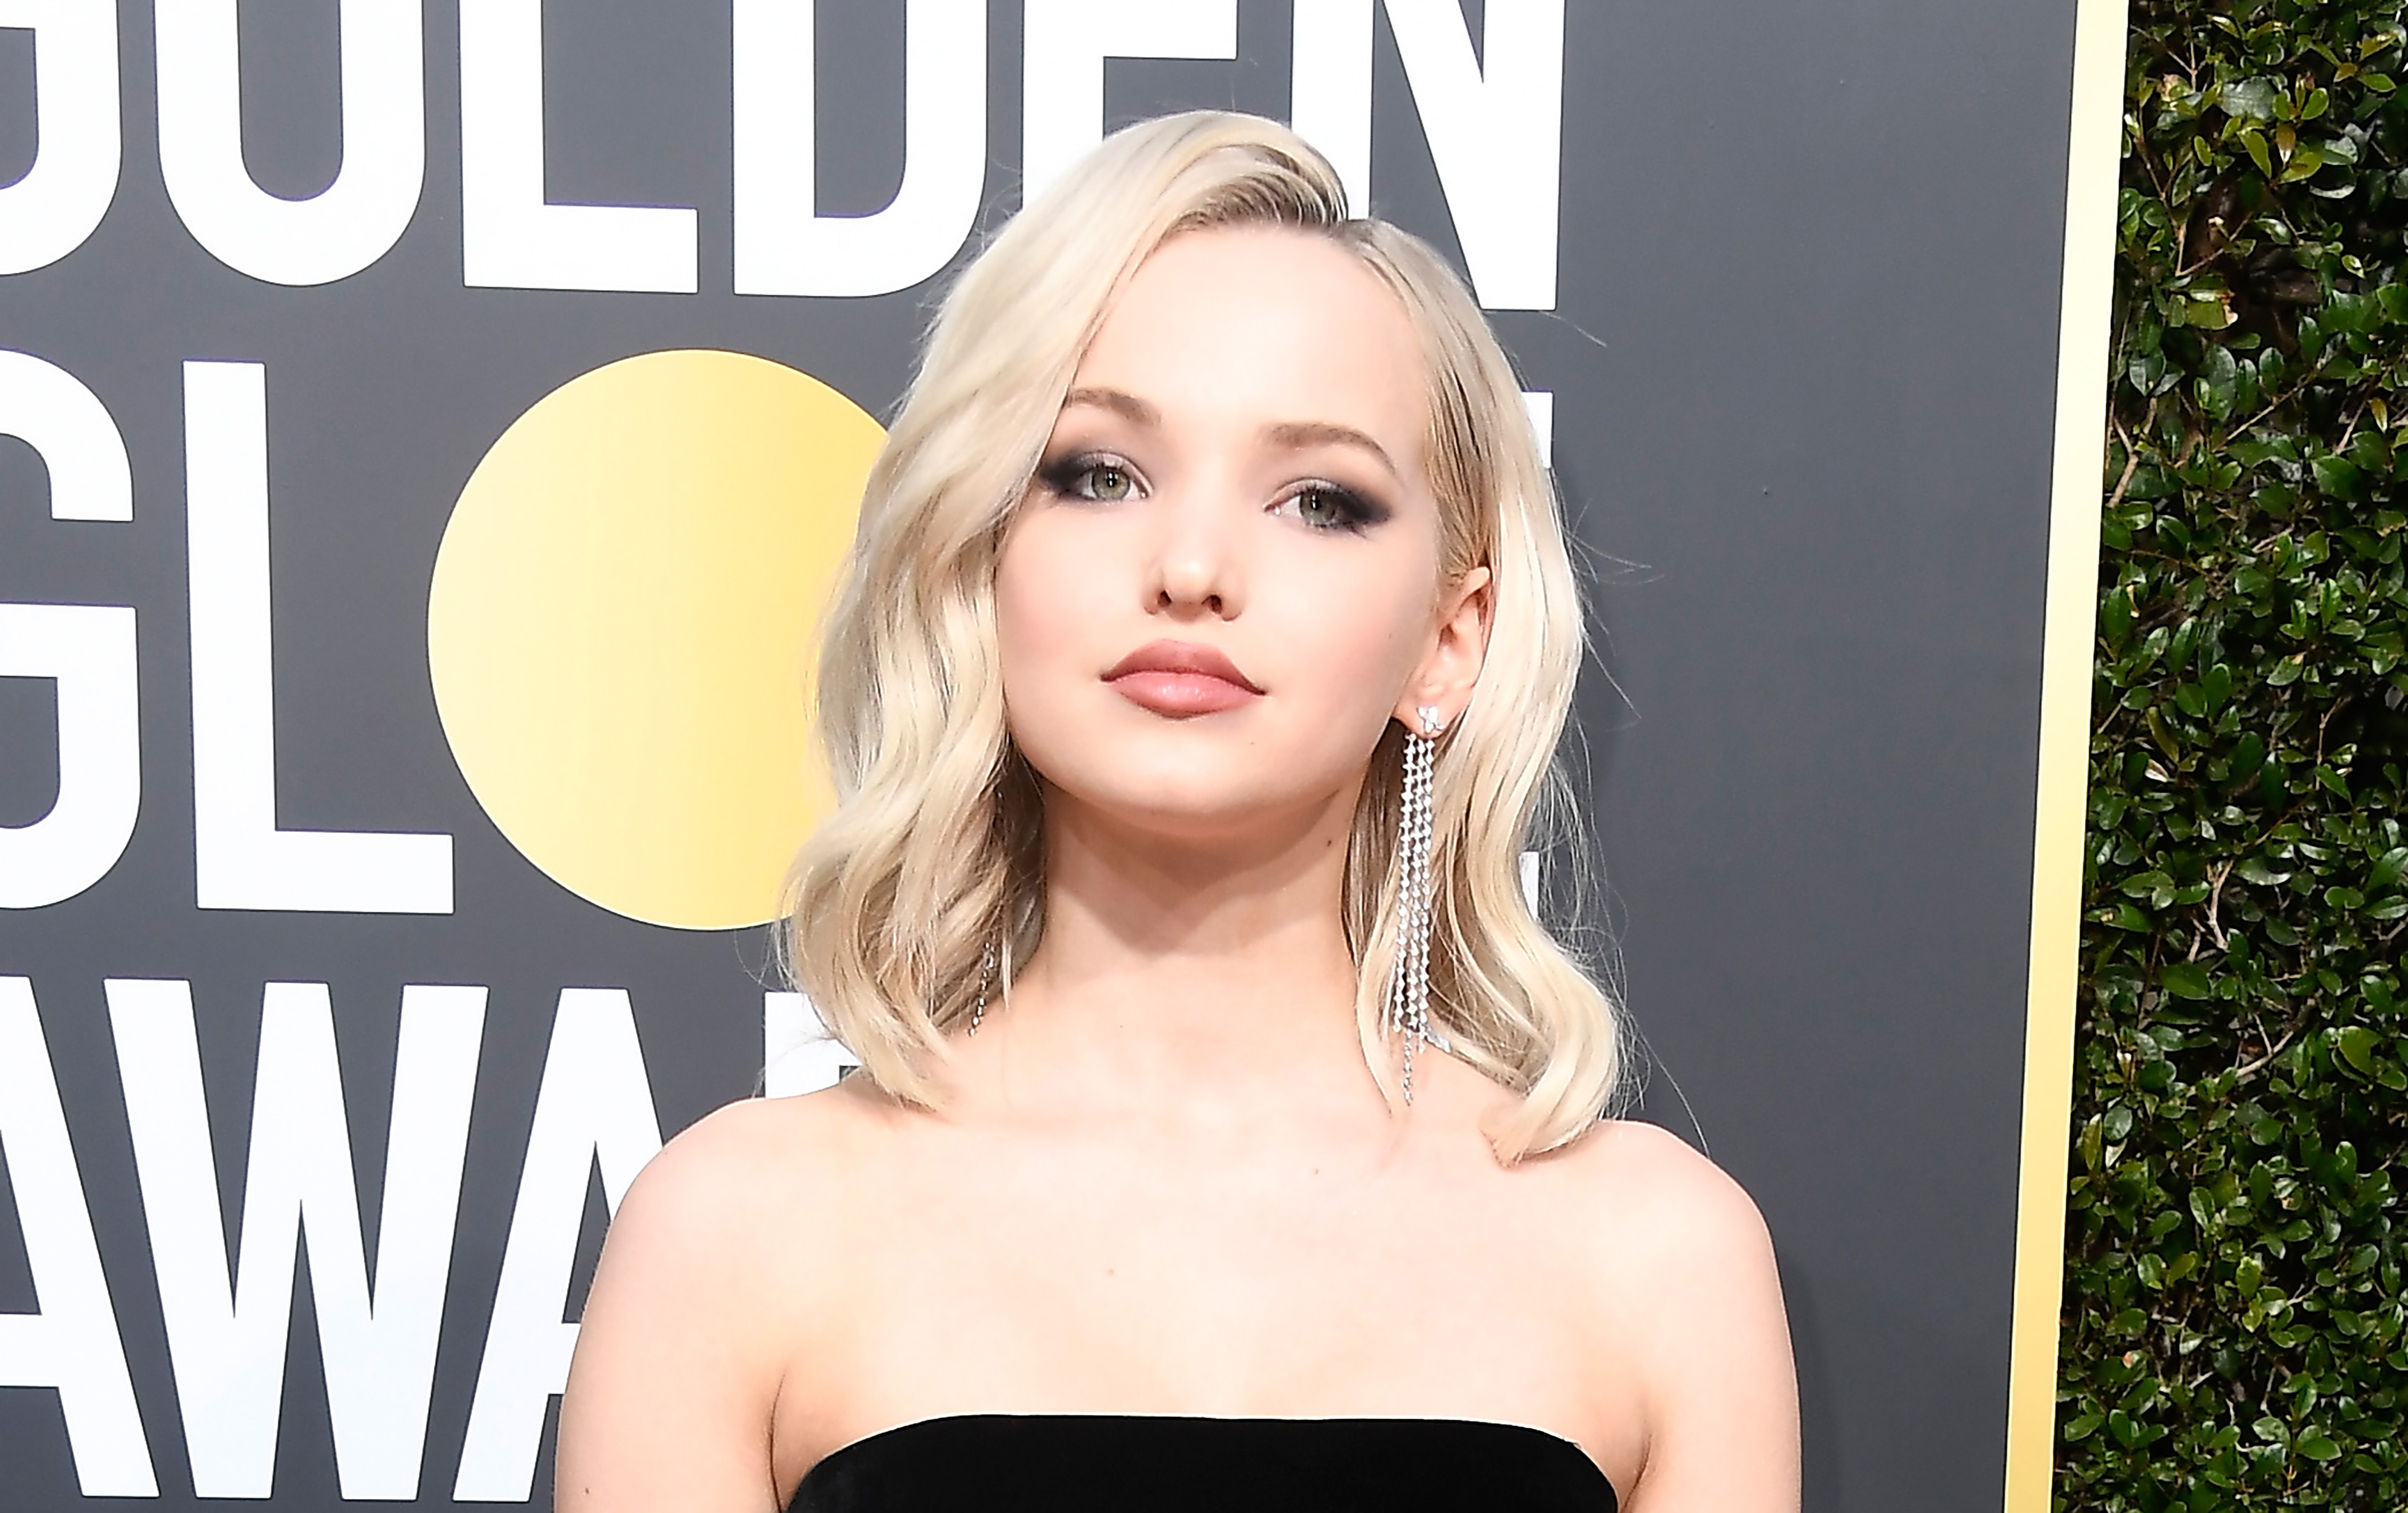 Dove Cameron Shuts Down Racist Instagram Troll With Such Class